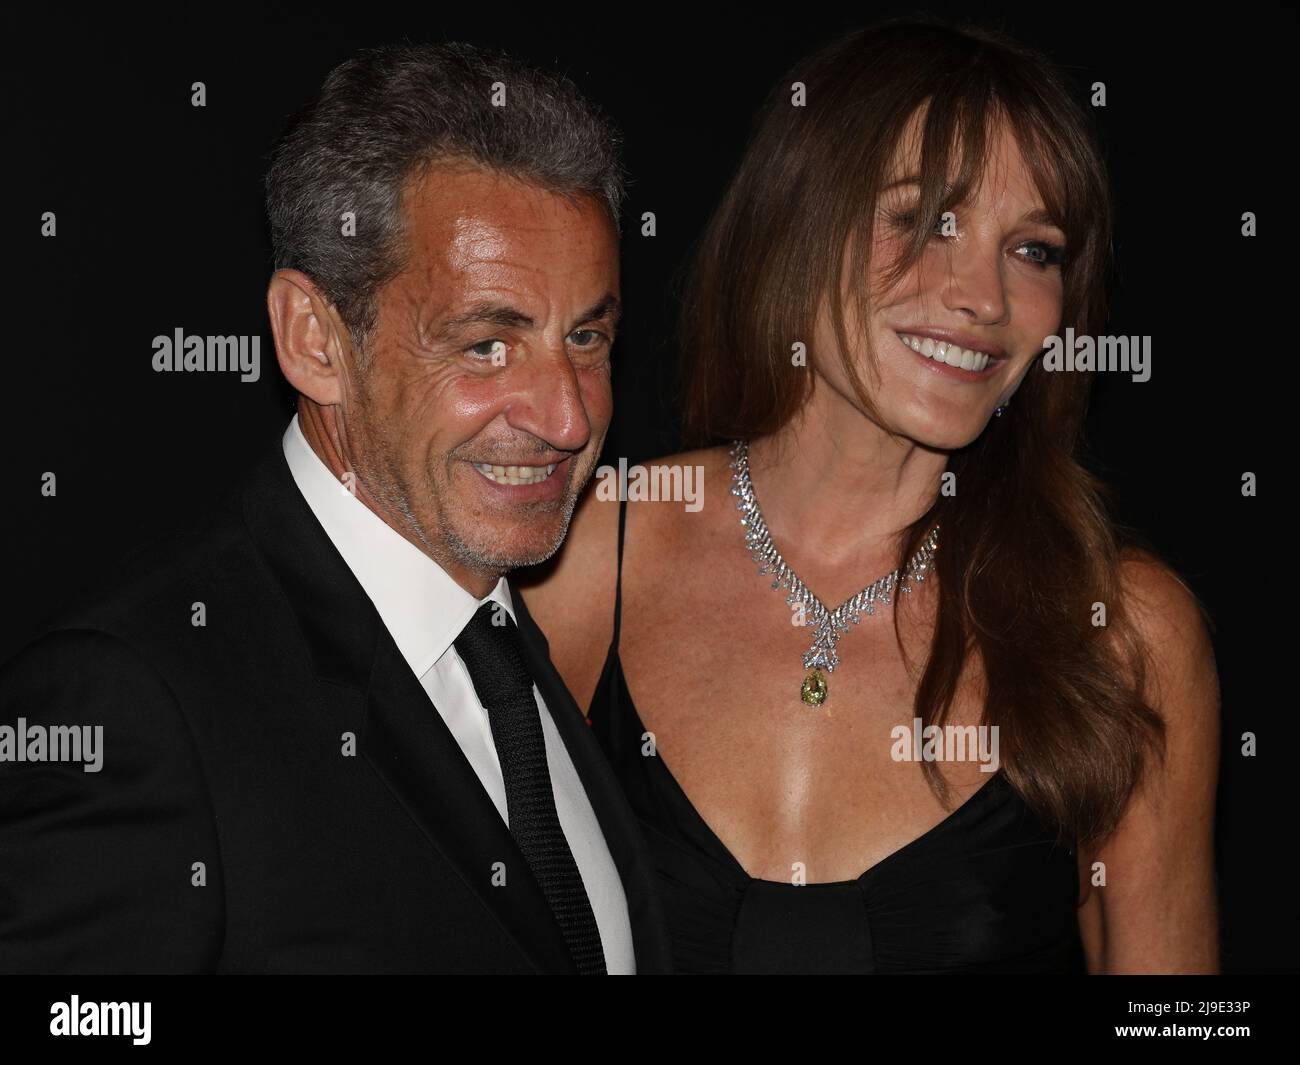 May 23, 2022, Cannes, Cote d'Azur, France: Former president of France NICOLAS SARKOZY and his wife CARLA BRUNI SARKOZY attend the KERING Women in Motion Awards photocall during 75th annual Cannes Film Festival (Credit Image: © Mickael Chavet/ZUMA Press Wire) Stock Photo